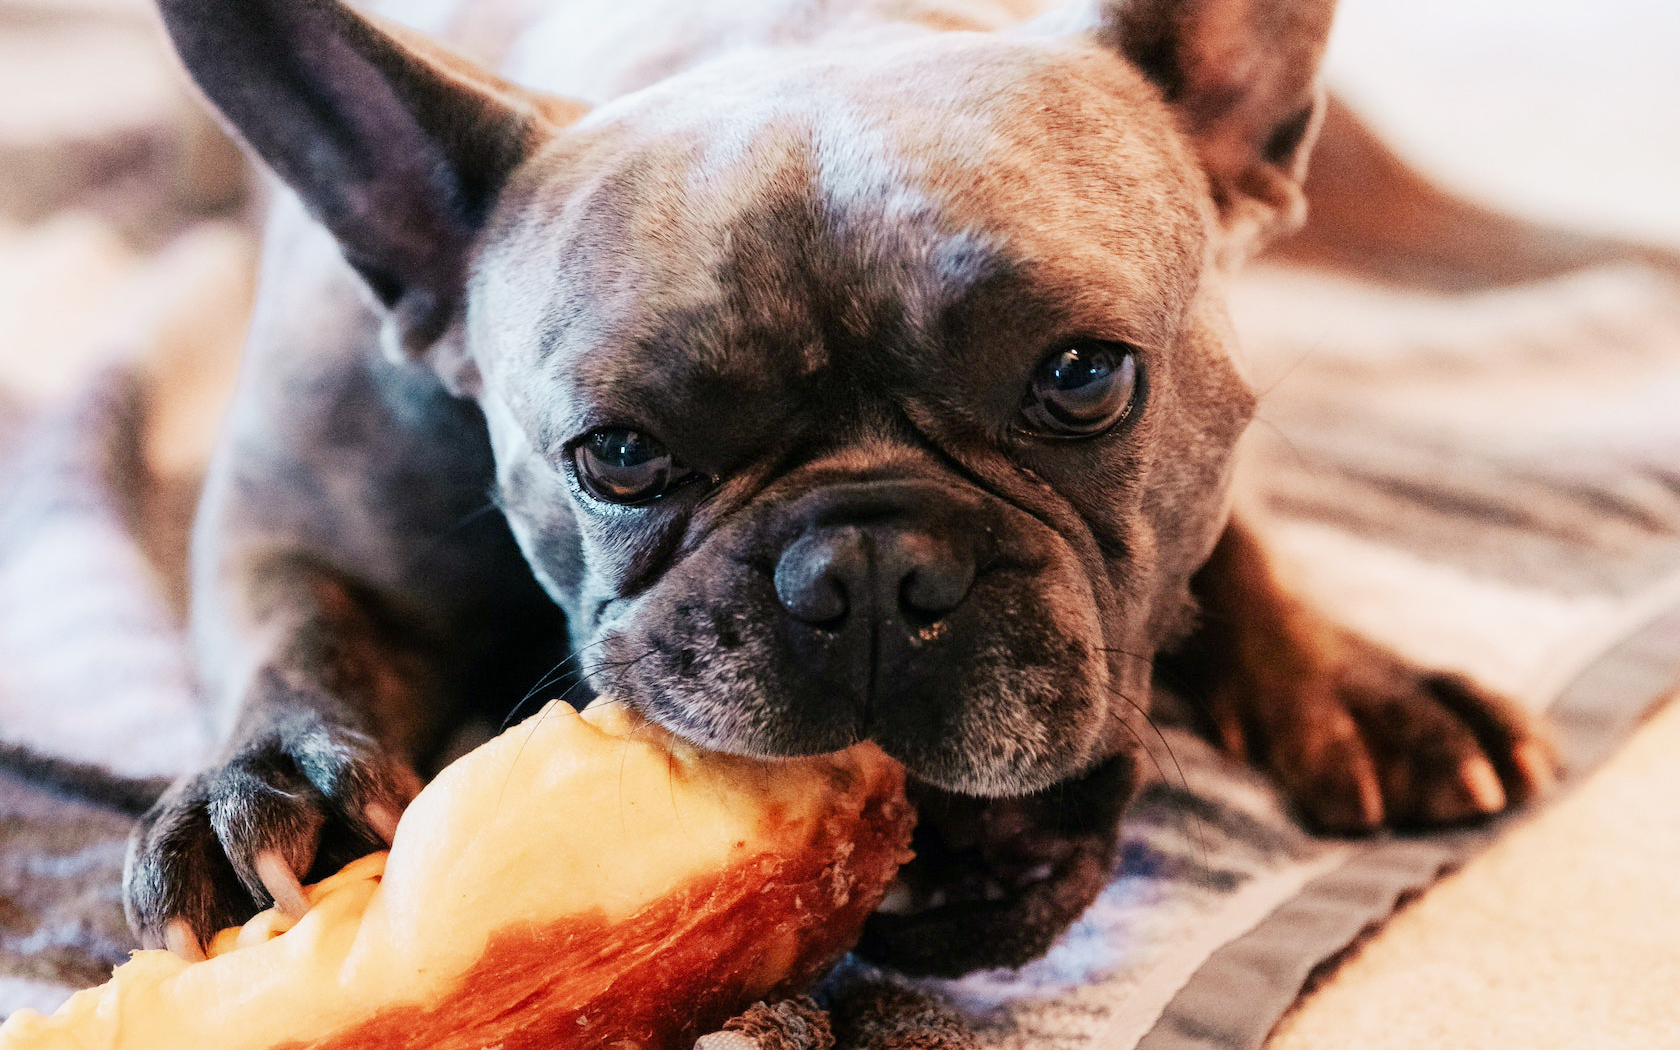 Coles Is Launching A "Self-Serve Dog Treats Bar" To Pamper Your Pooch